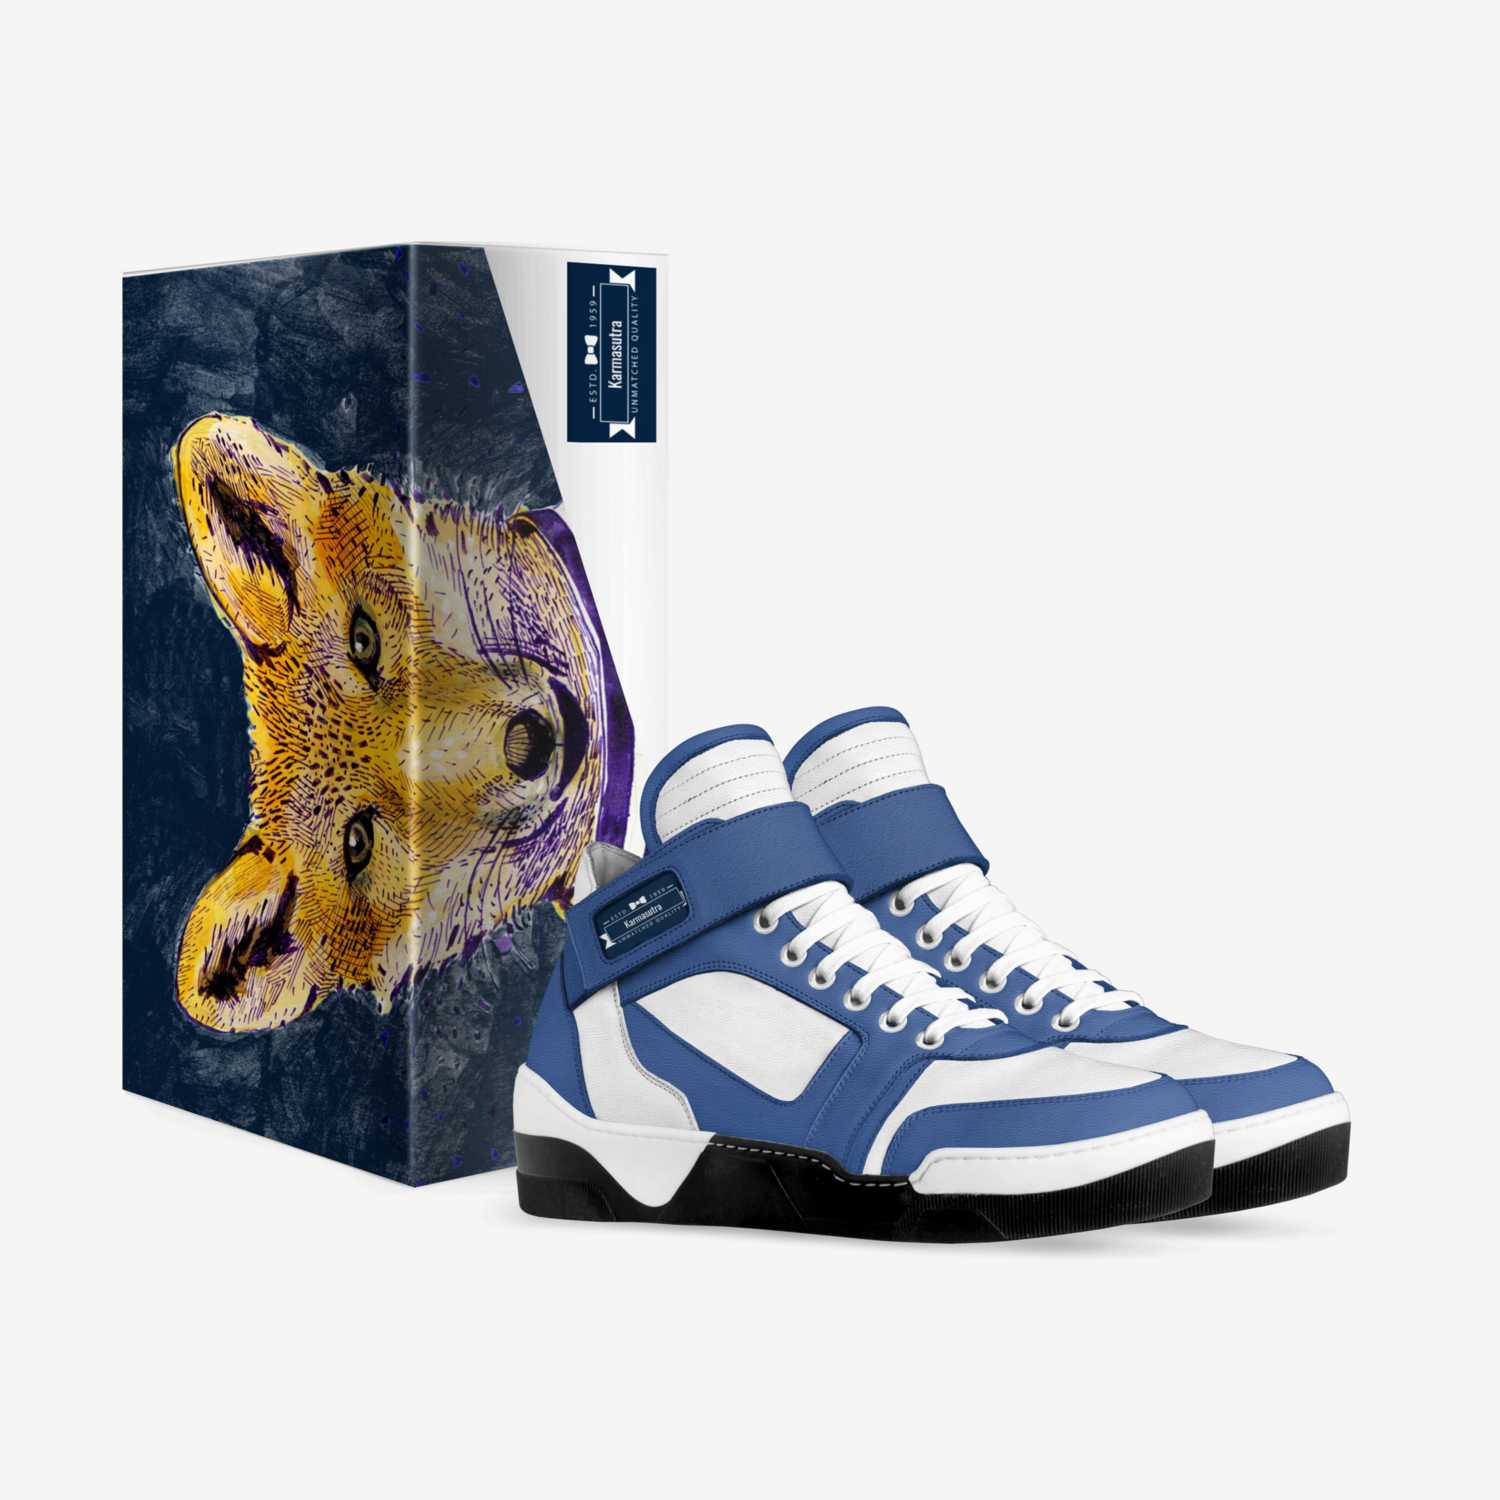 Karmasutra custom made in Italy shoes by Antoine Anderson | Box view